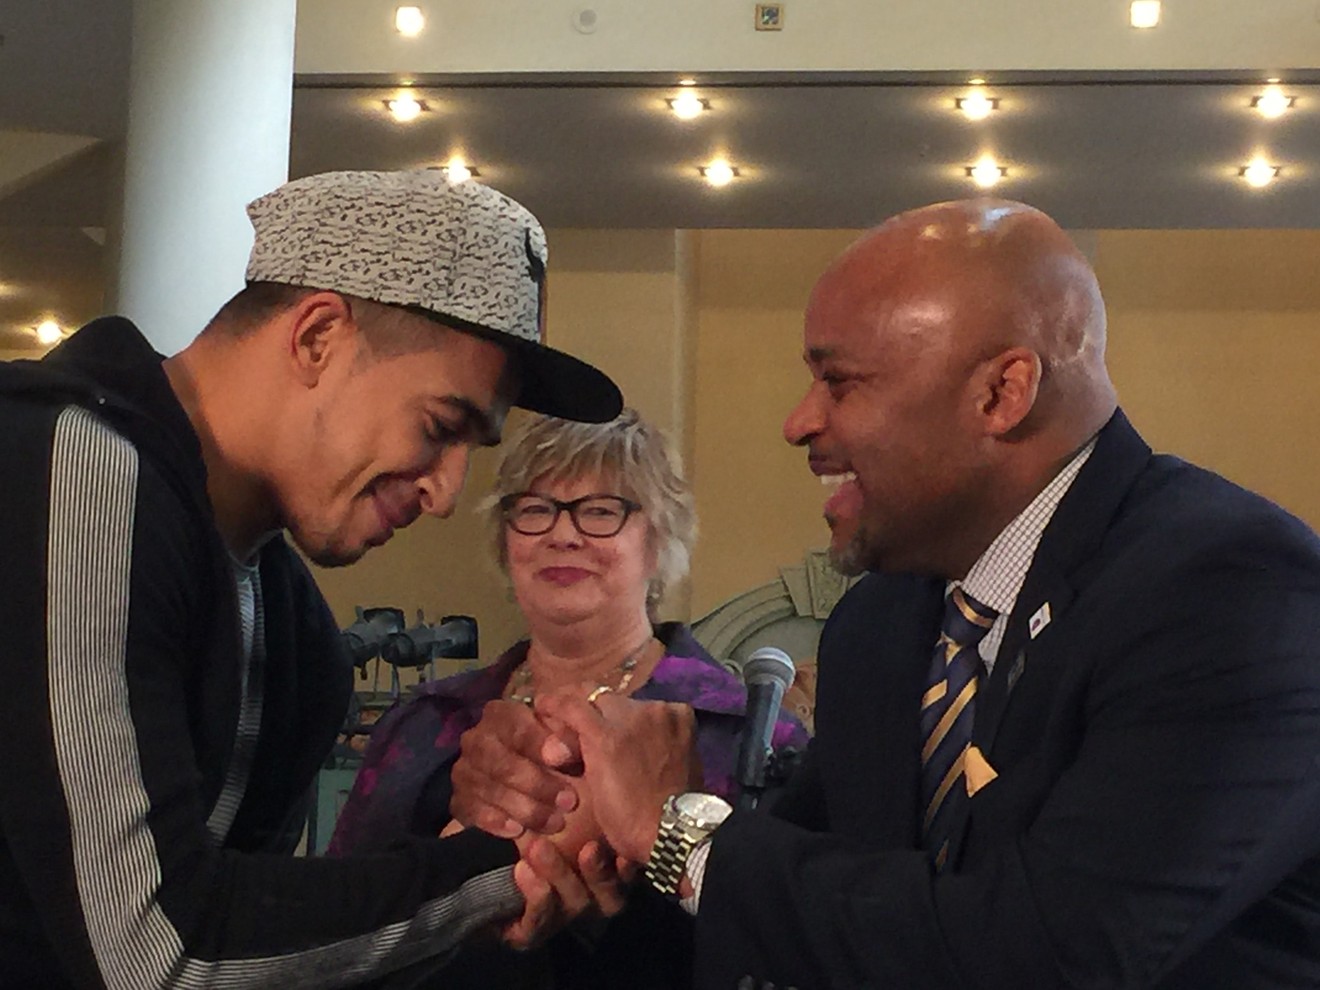 French dancer Salah and Mayor Michael Hancock share a moment of joy after a brief hip-hop dance lesson in front of the press. Jayne Buck of Visit Denver looks on.